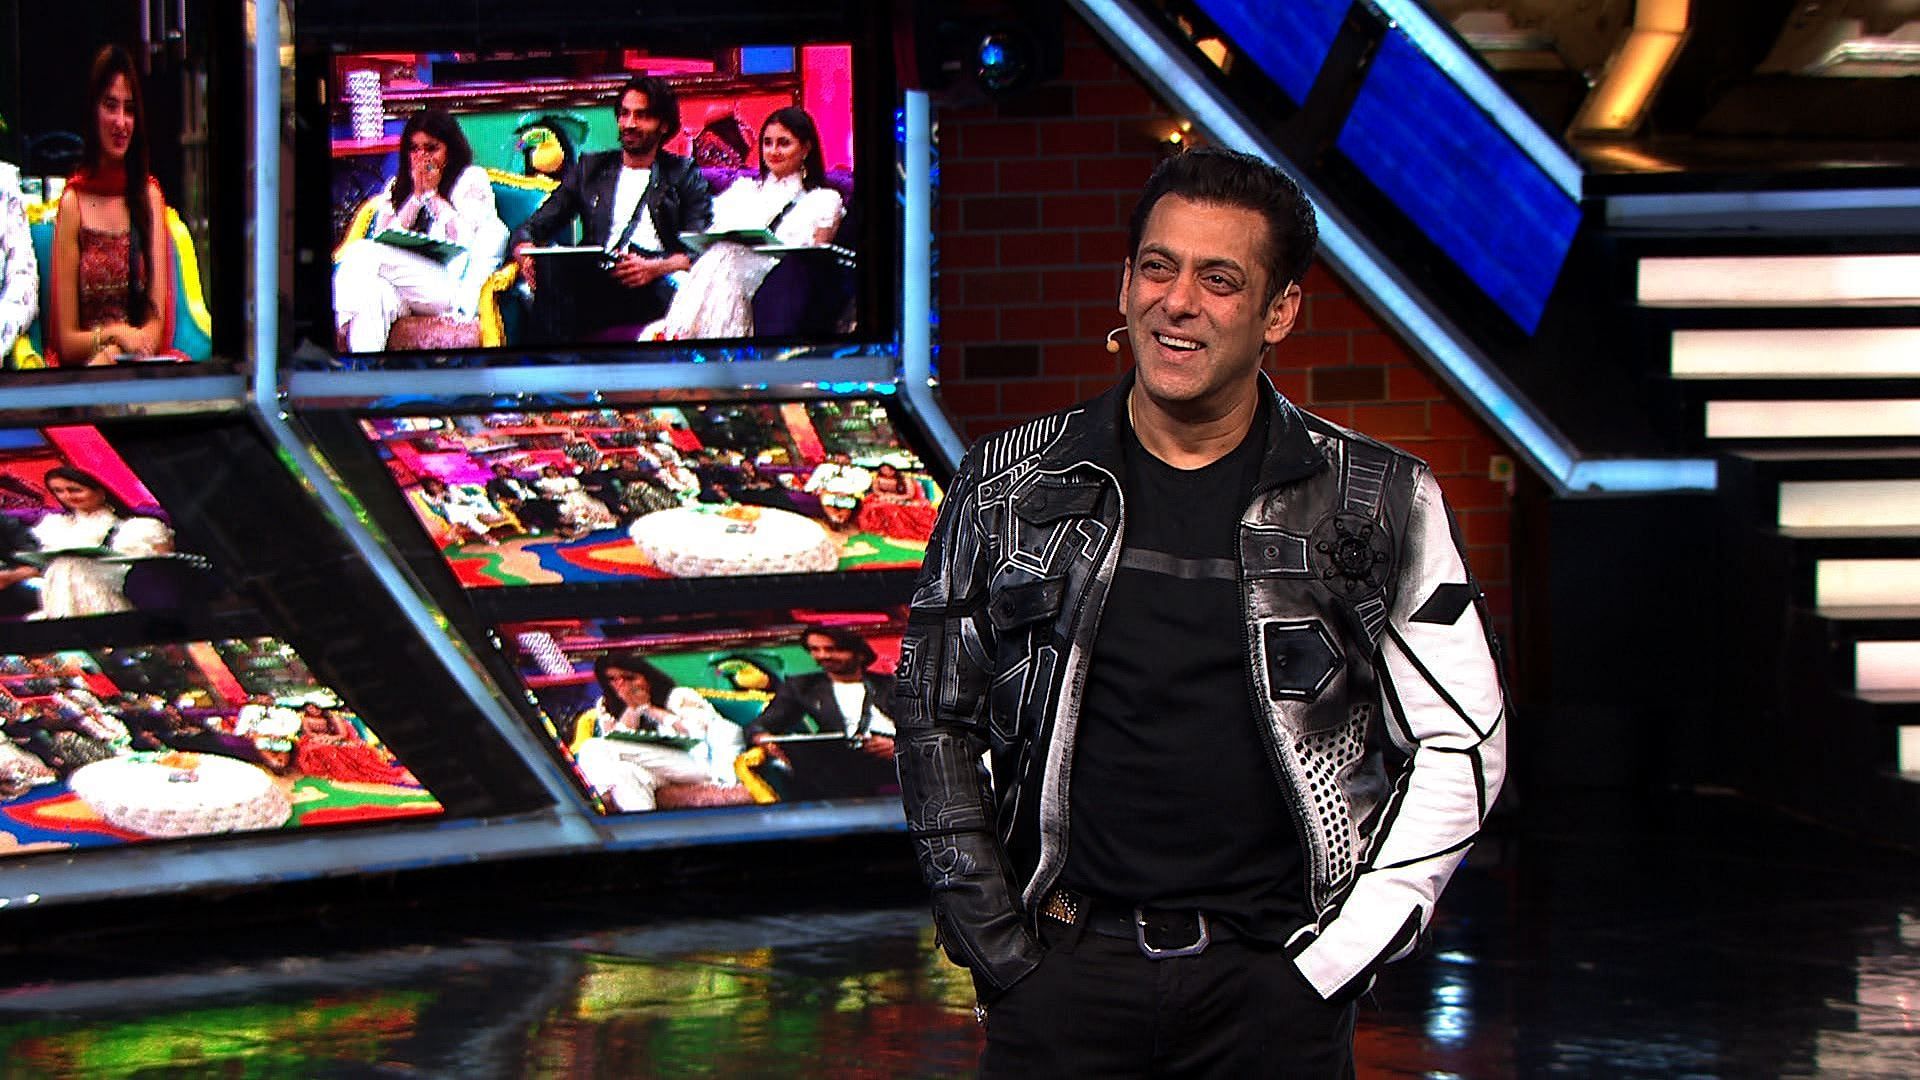 The contestants are grilled yet again this weekend by Salman Khan.